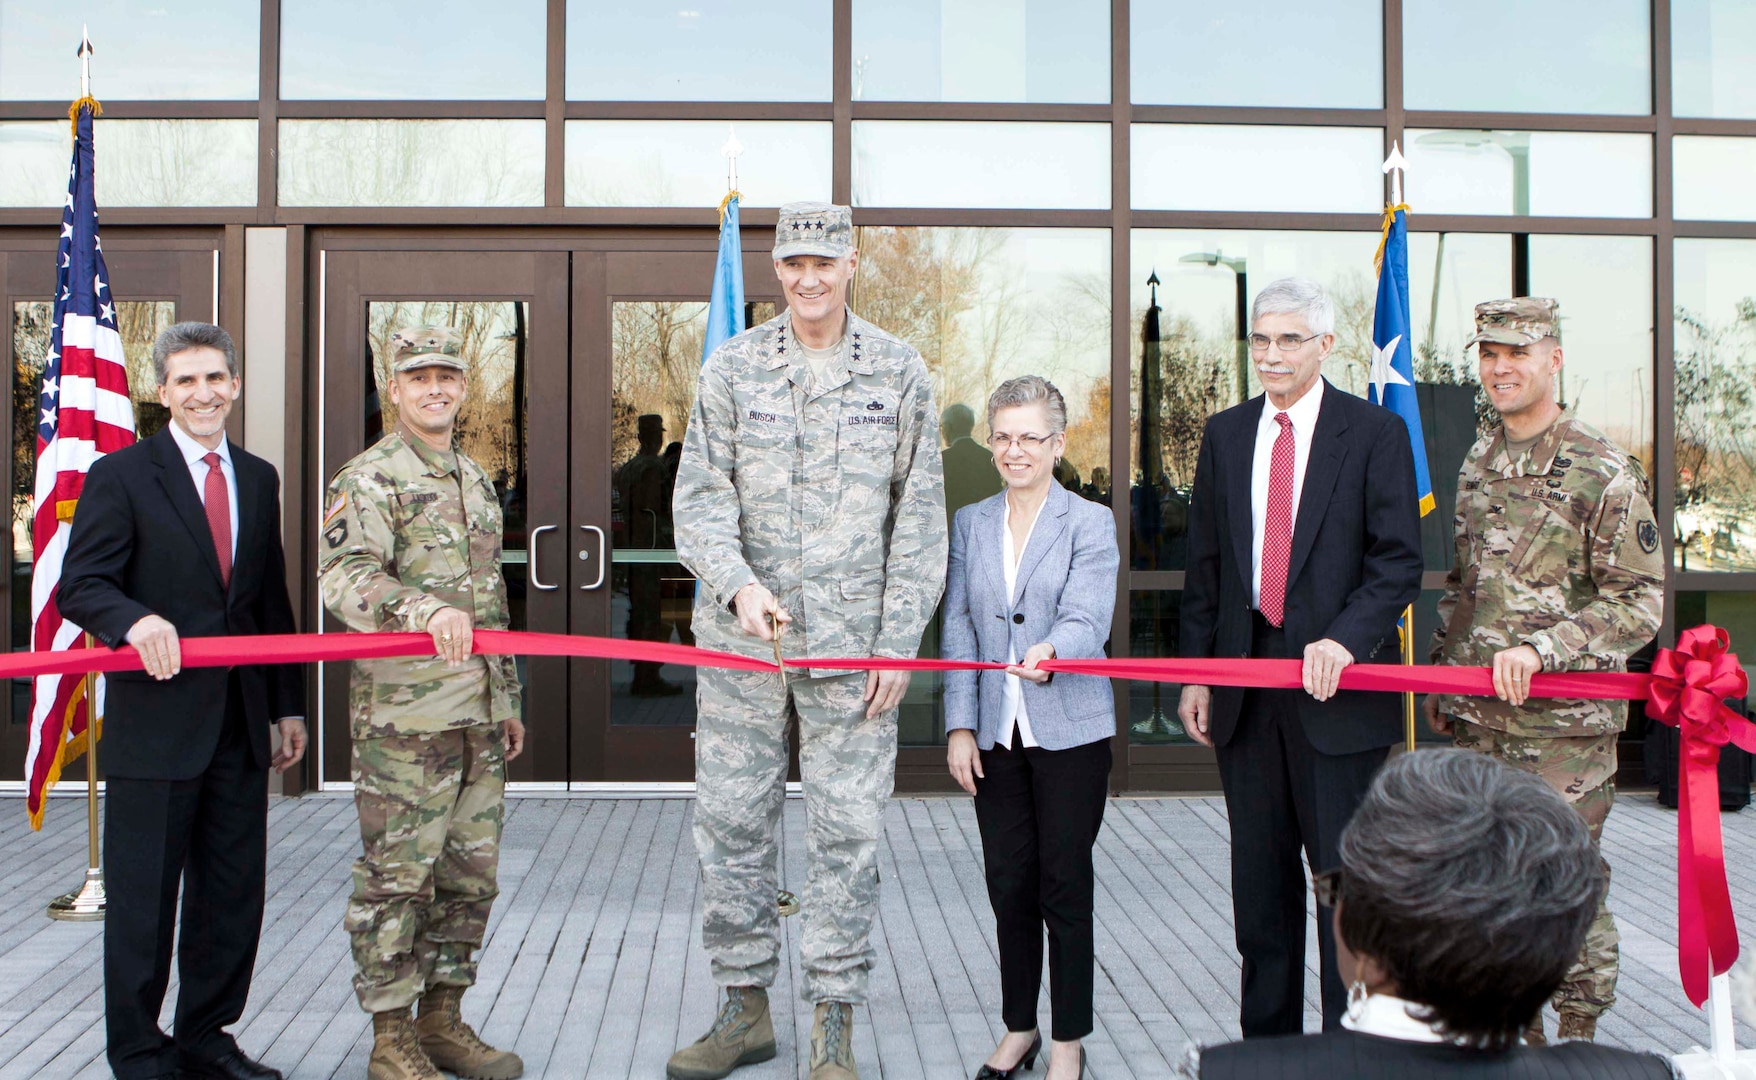 From left, Robert Montefour, site director, DLA Installation Support at Susquehanna; Army Brig. Gen. John S. Laskodi, DLA Distribution commanding general; Air Force Lt. Gen. Andy Busch, DLA director; Twila Gonzales, DLA Distribution deputy commander; Denis du Breuil, deputy chief of Construction-North, U.S. Army Corps of Engineers, Baltimore District; and Army Col. Brad Eungard, installation commander, cut the ribbon on DLA Distribution’s new headquarters building.